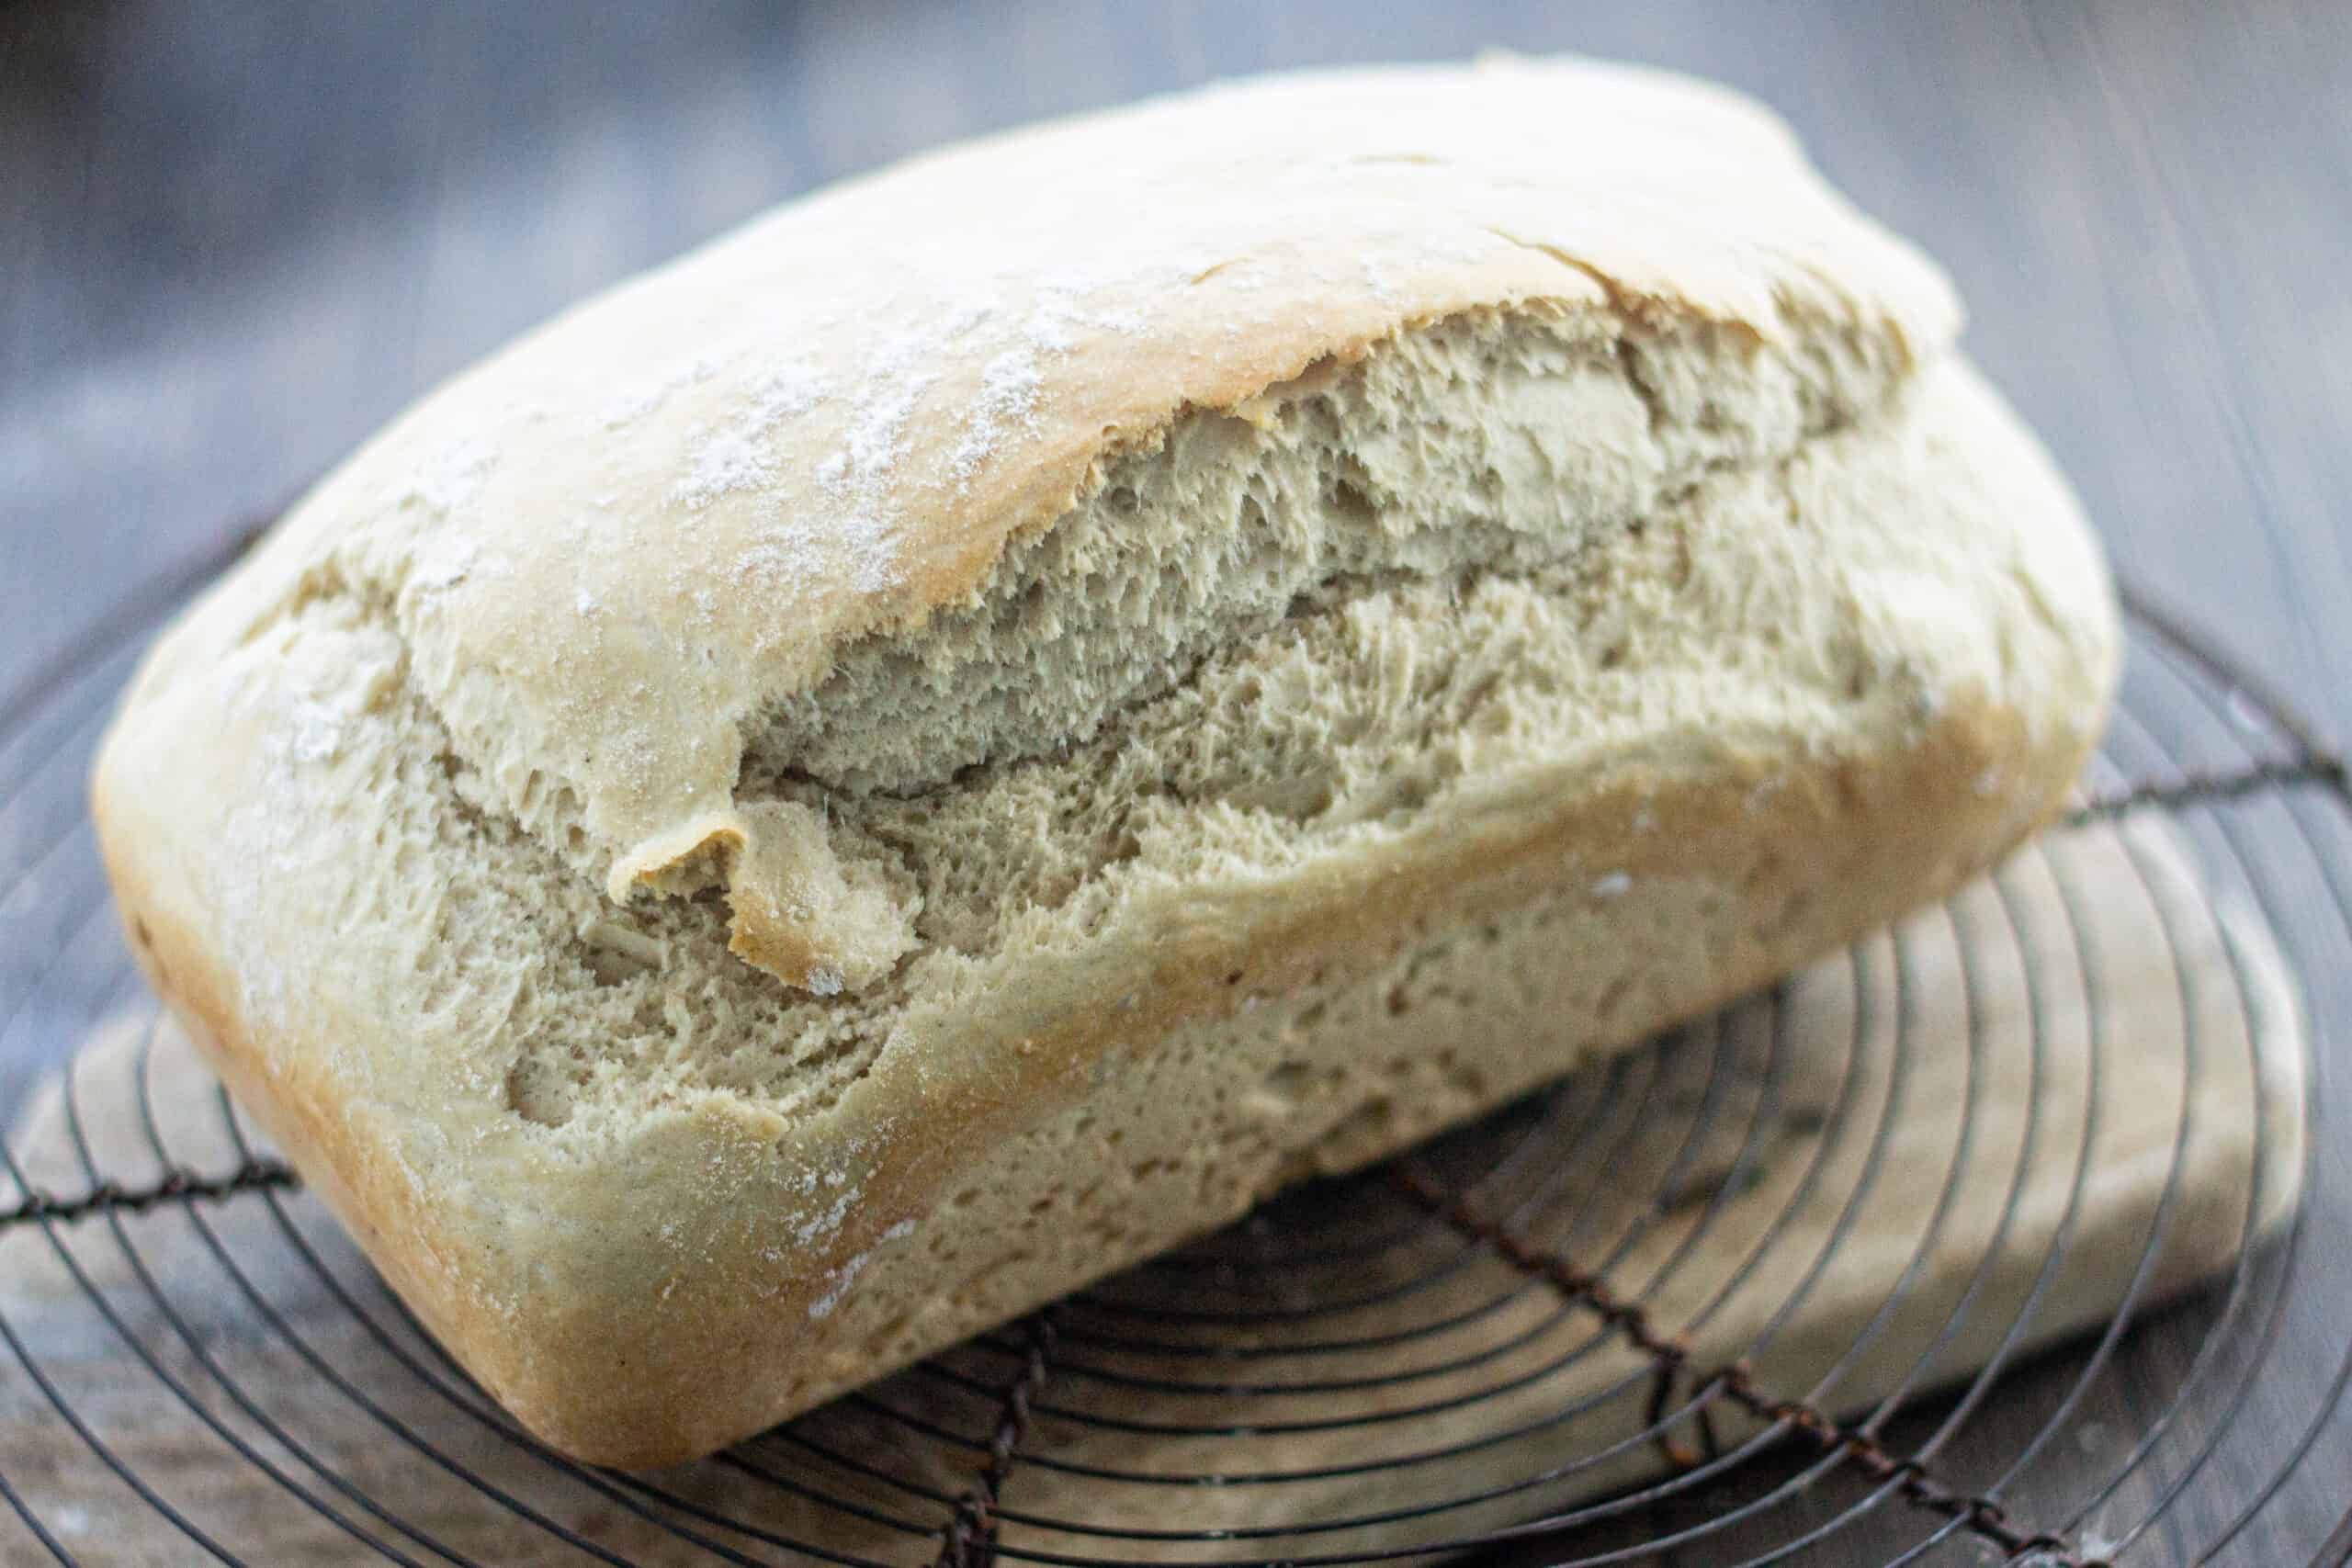 A simple white sandwich loaf